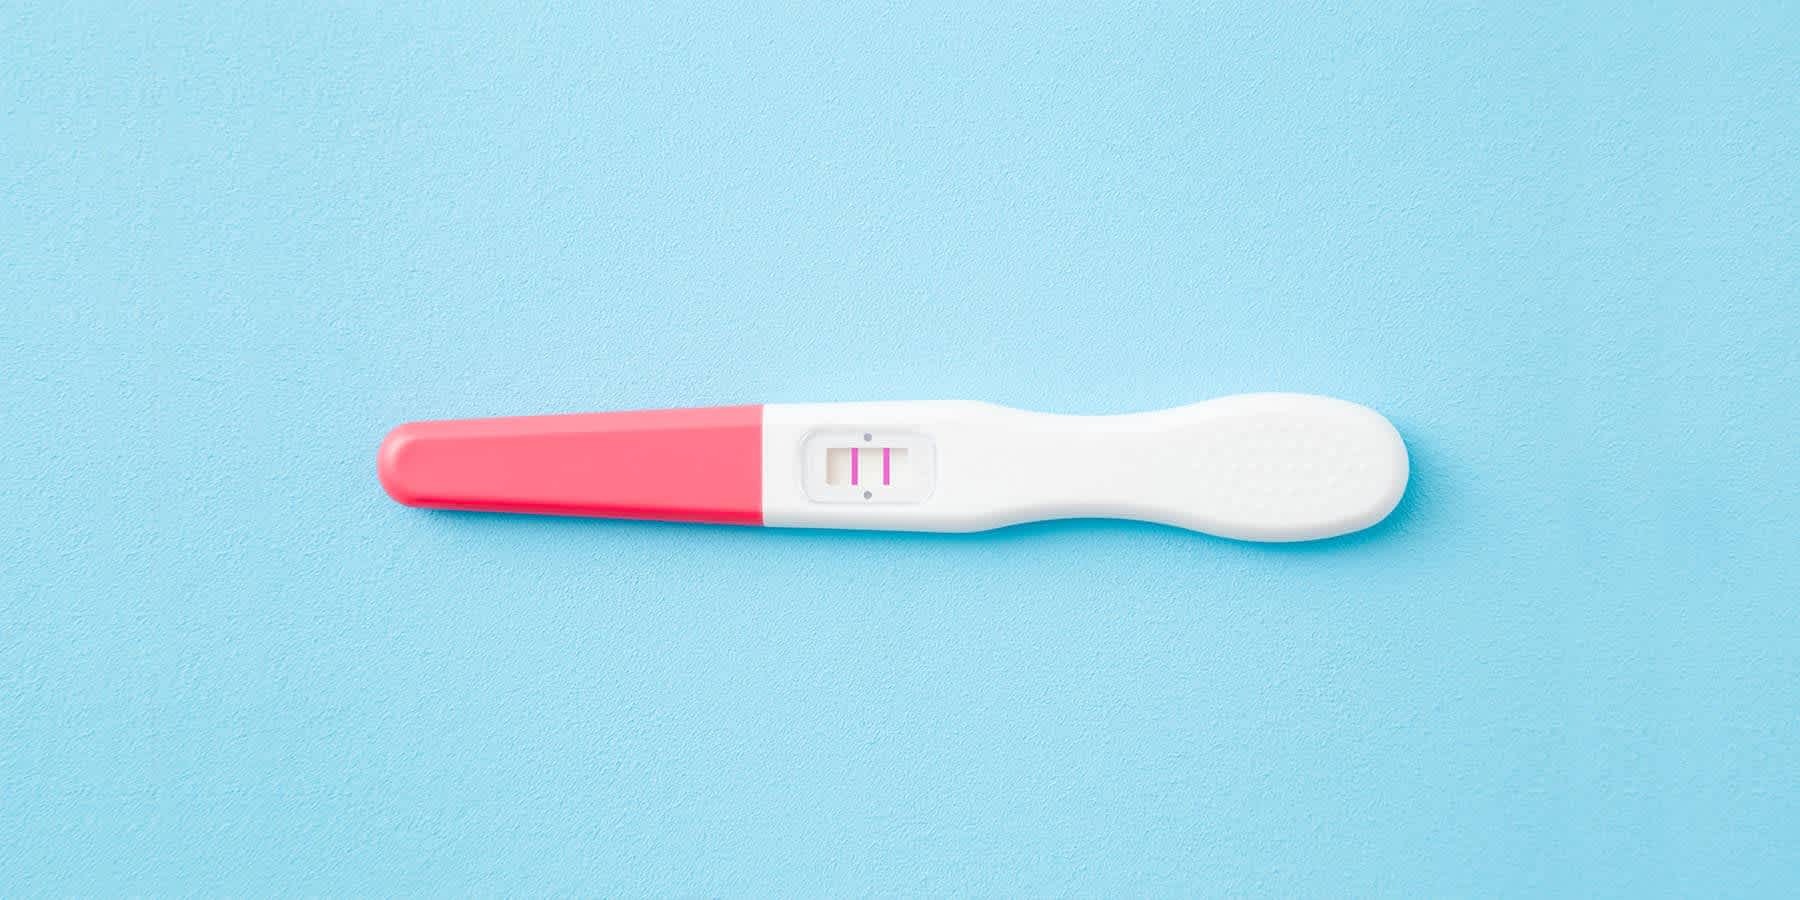 Positive pregnancy test on a blue background to highlight link between B12 status and pregnancy outcomes